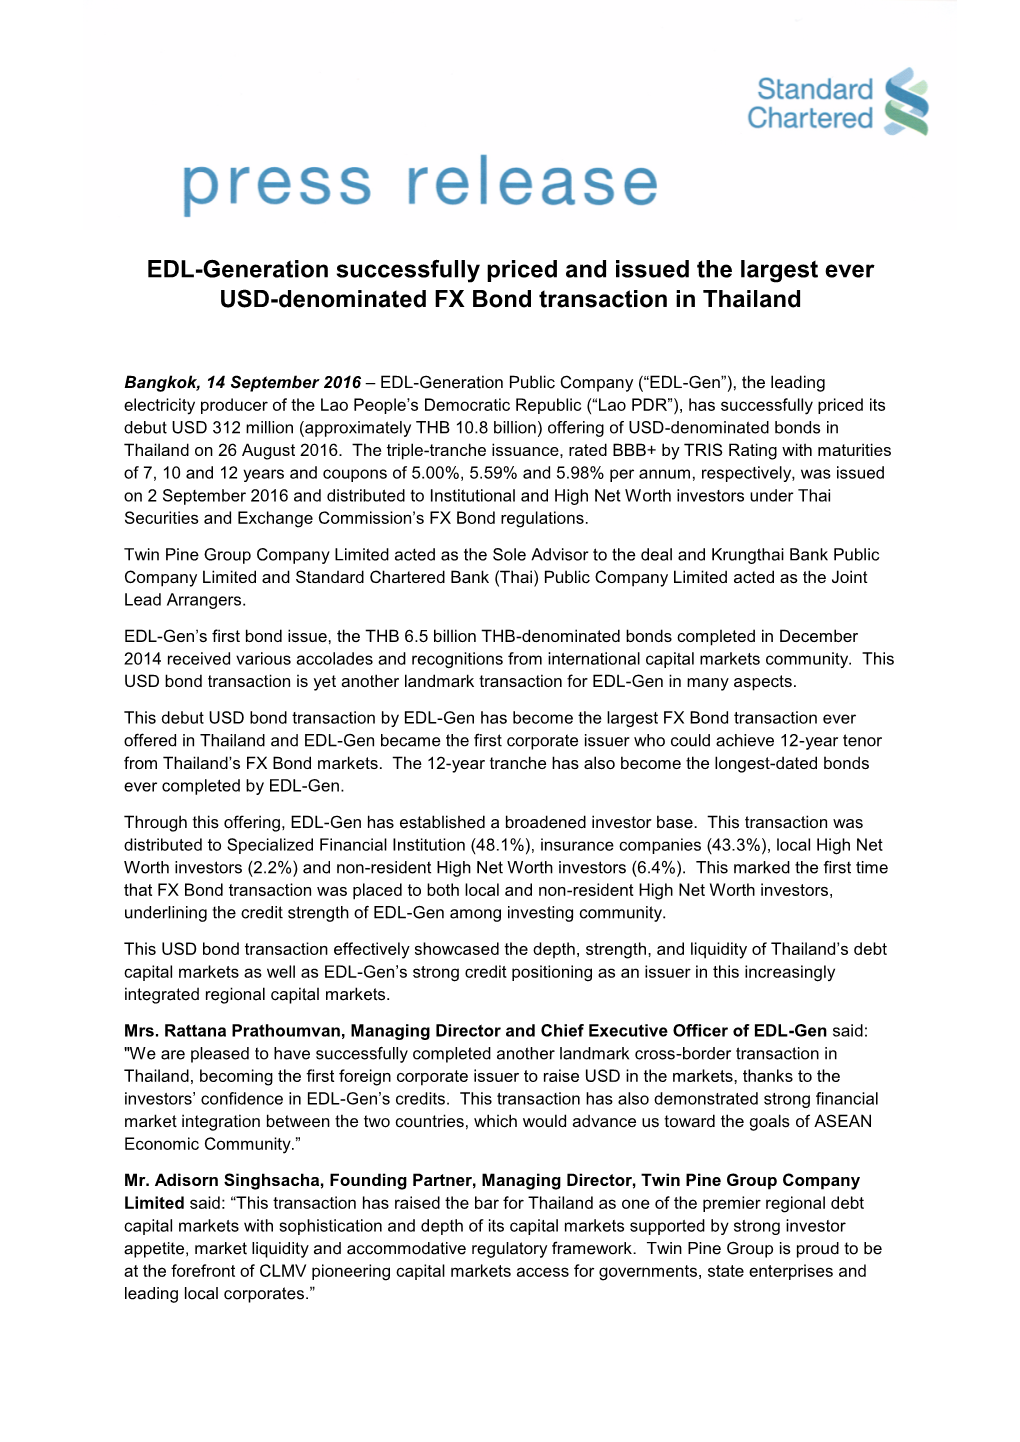 EDL-Generation Successfully Priced and Issued the Largest Ever USD-Denominated FX Bond Transaction in Thailand